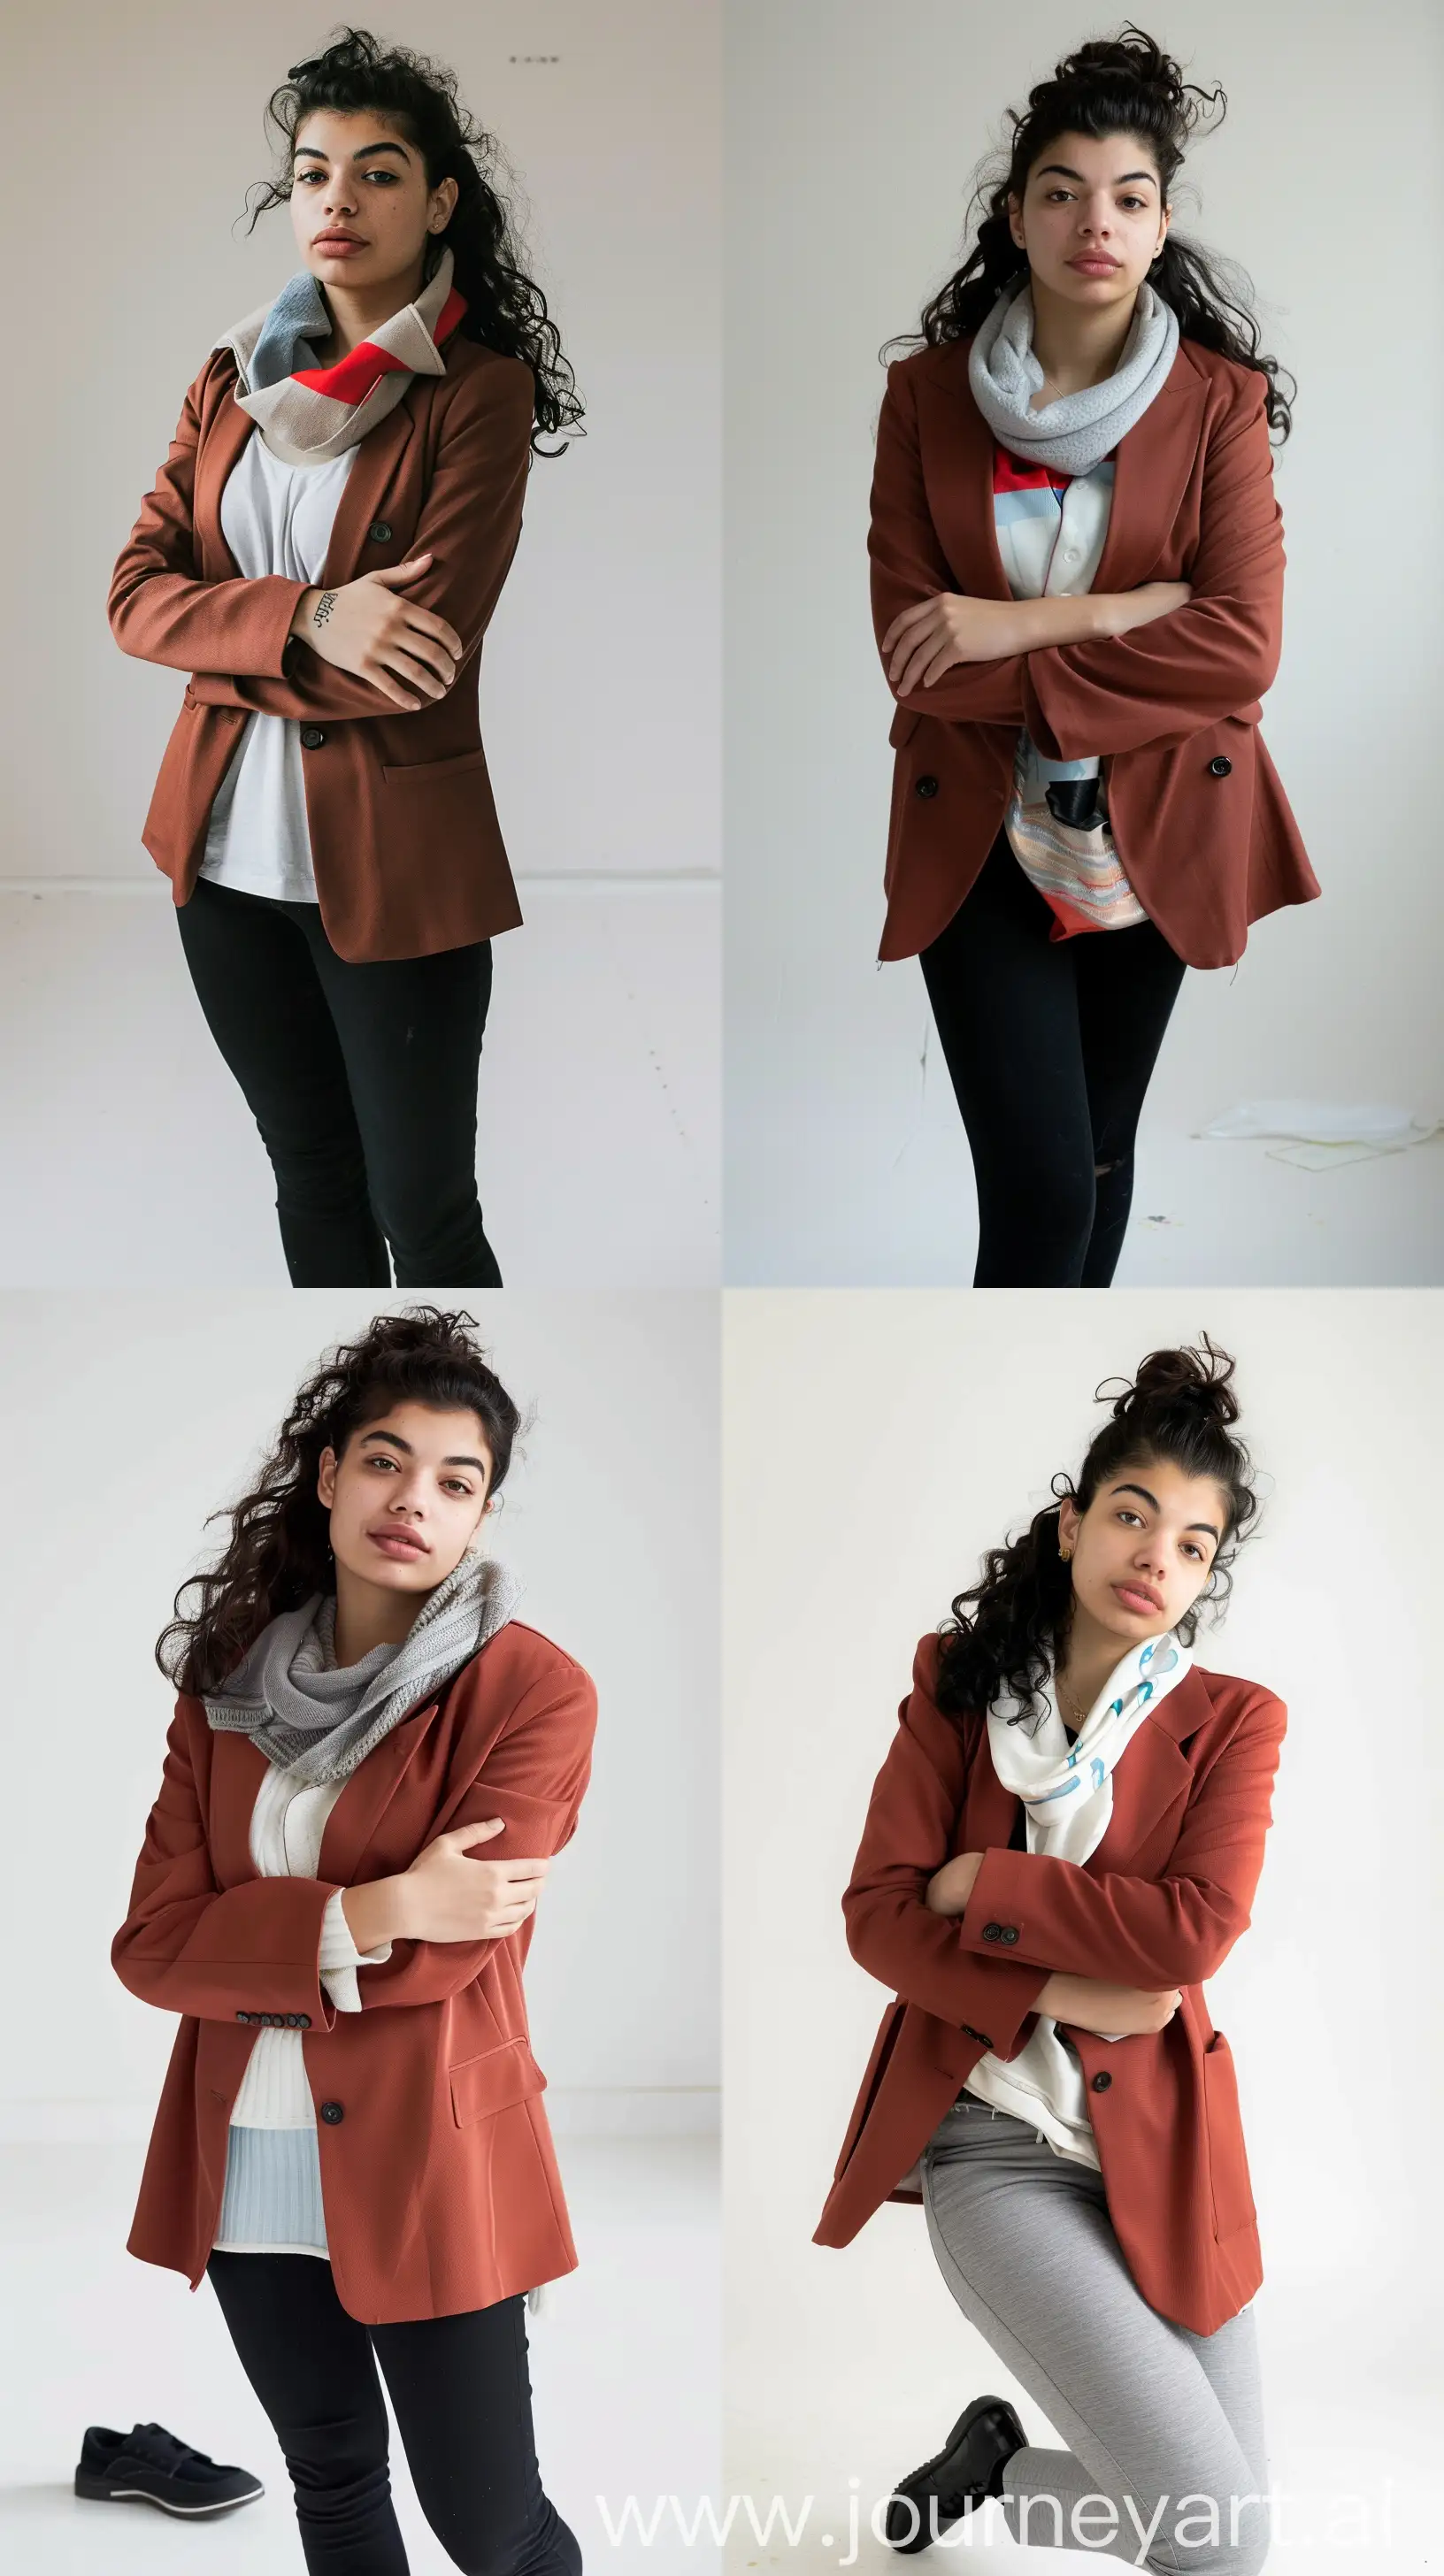 An elegant woman wearing a terracotta-toned blazer in a photo shoot with black shoes, white background, and natural lighting --cref https://cdn.discordapp.com/attachments/997271750368833636/1222082228004192266/just_cent_realistic_young_modern_friendly_and_confident_egyptia_983e3c81-7e35-469a-8414-8d18ff2f7d28.png?ex=6614ebc4&is=660276c4&hm=d81c210ba1f3cdad070b70dec7dac89479ed63f8c952724e05db6103f0947f6a&  --style raw --ar 9:16 --v 6